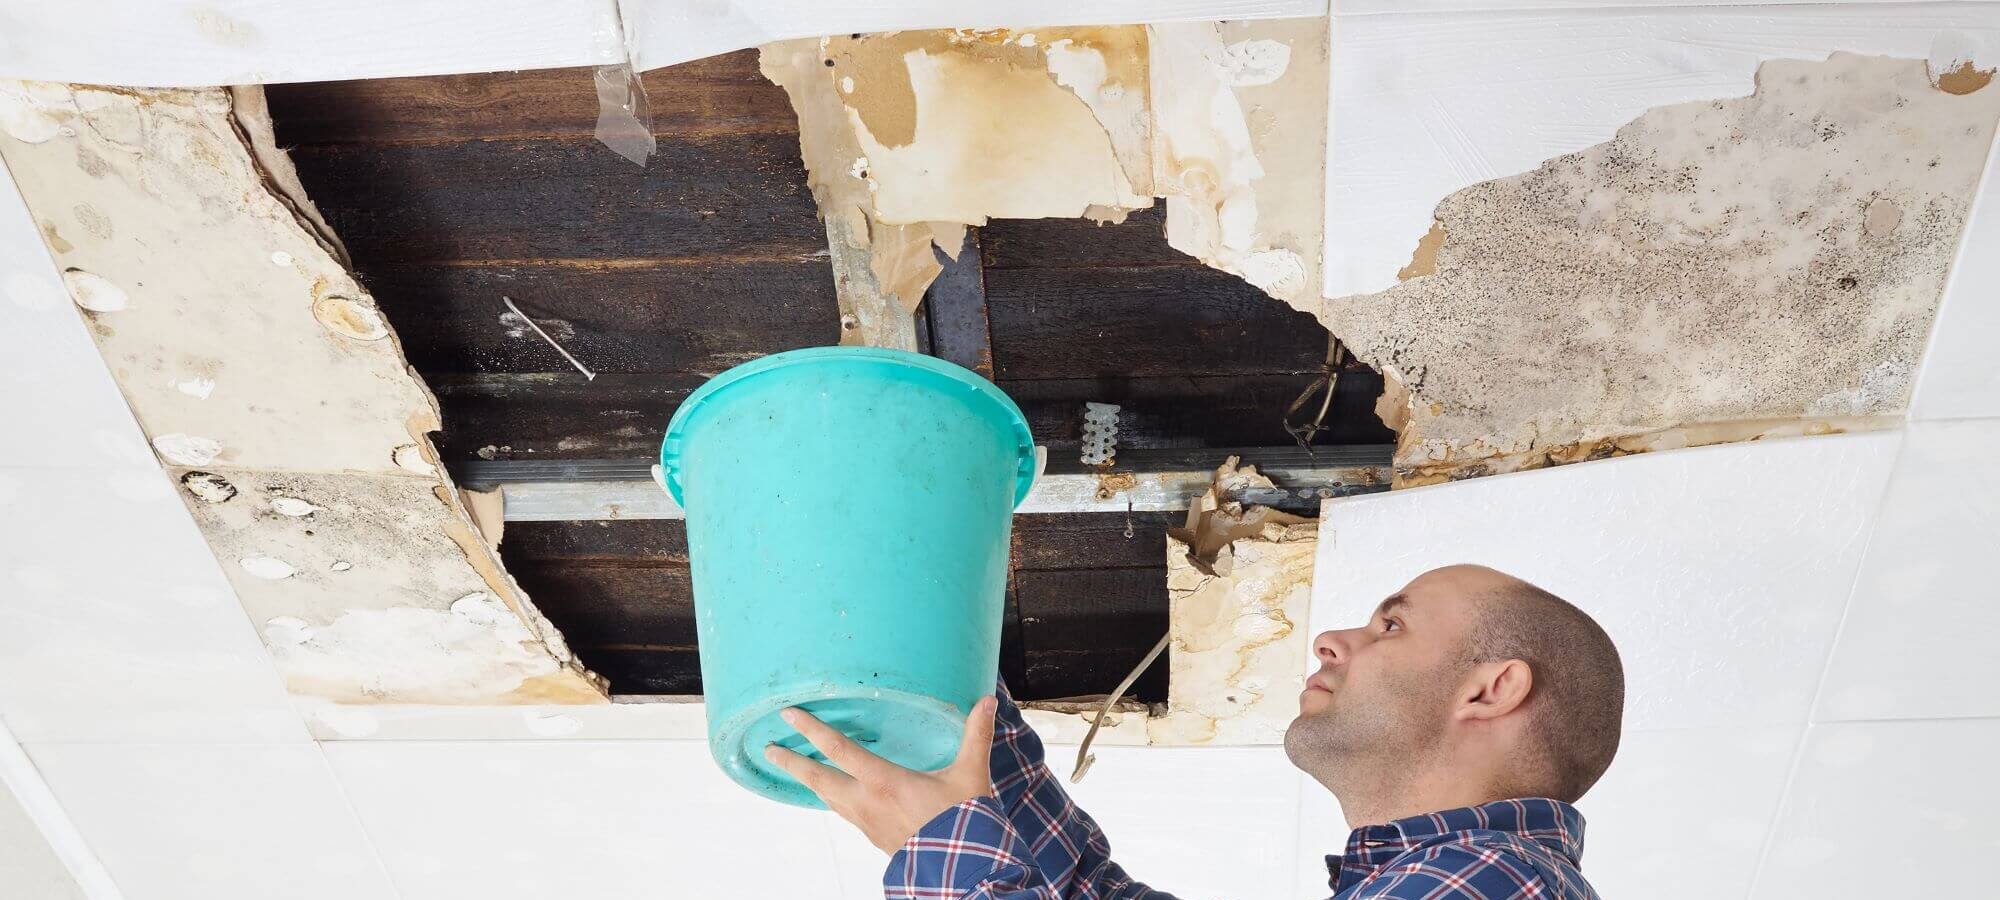 Does Your Home Insurance Cover You for Water Damage in South Florida?